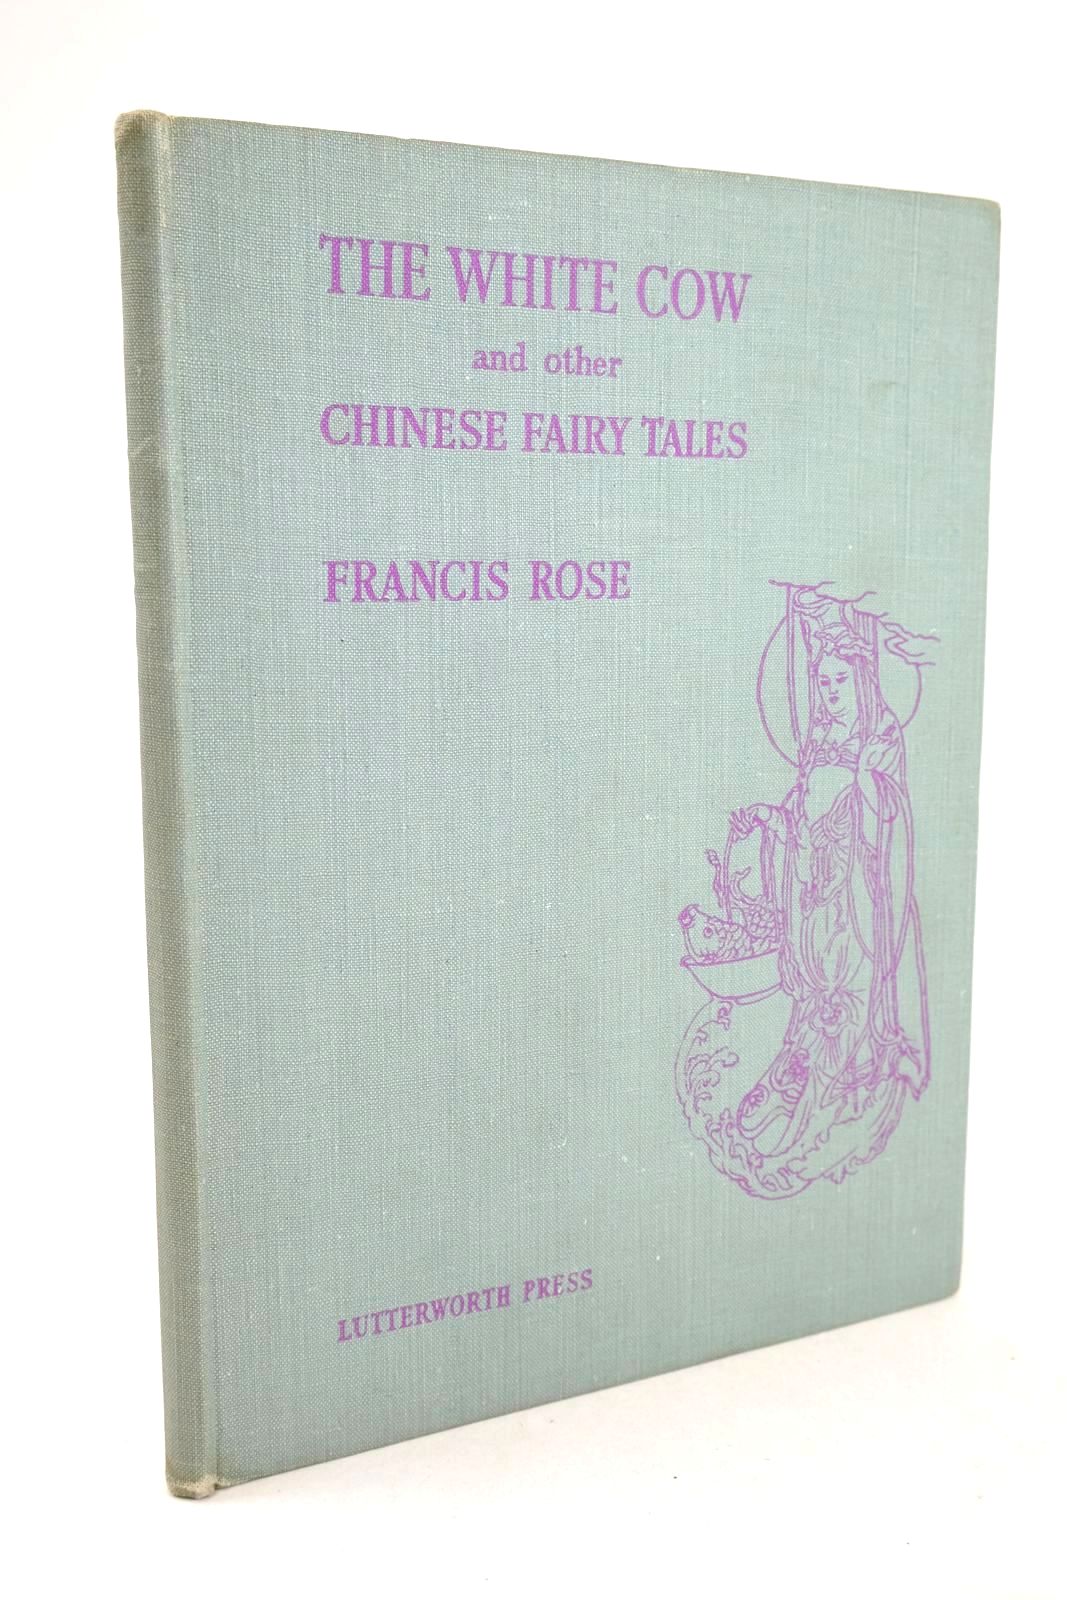 Photo of THE WHITE COW AND OTHER CHINESE FAIRY TALES written by Rose, Francis illustrated by Rose, Francis published by Lutterworth Press (STOCK CODE: 1325902)  for sale by Stella & Rose's Books